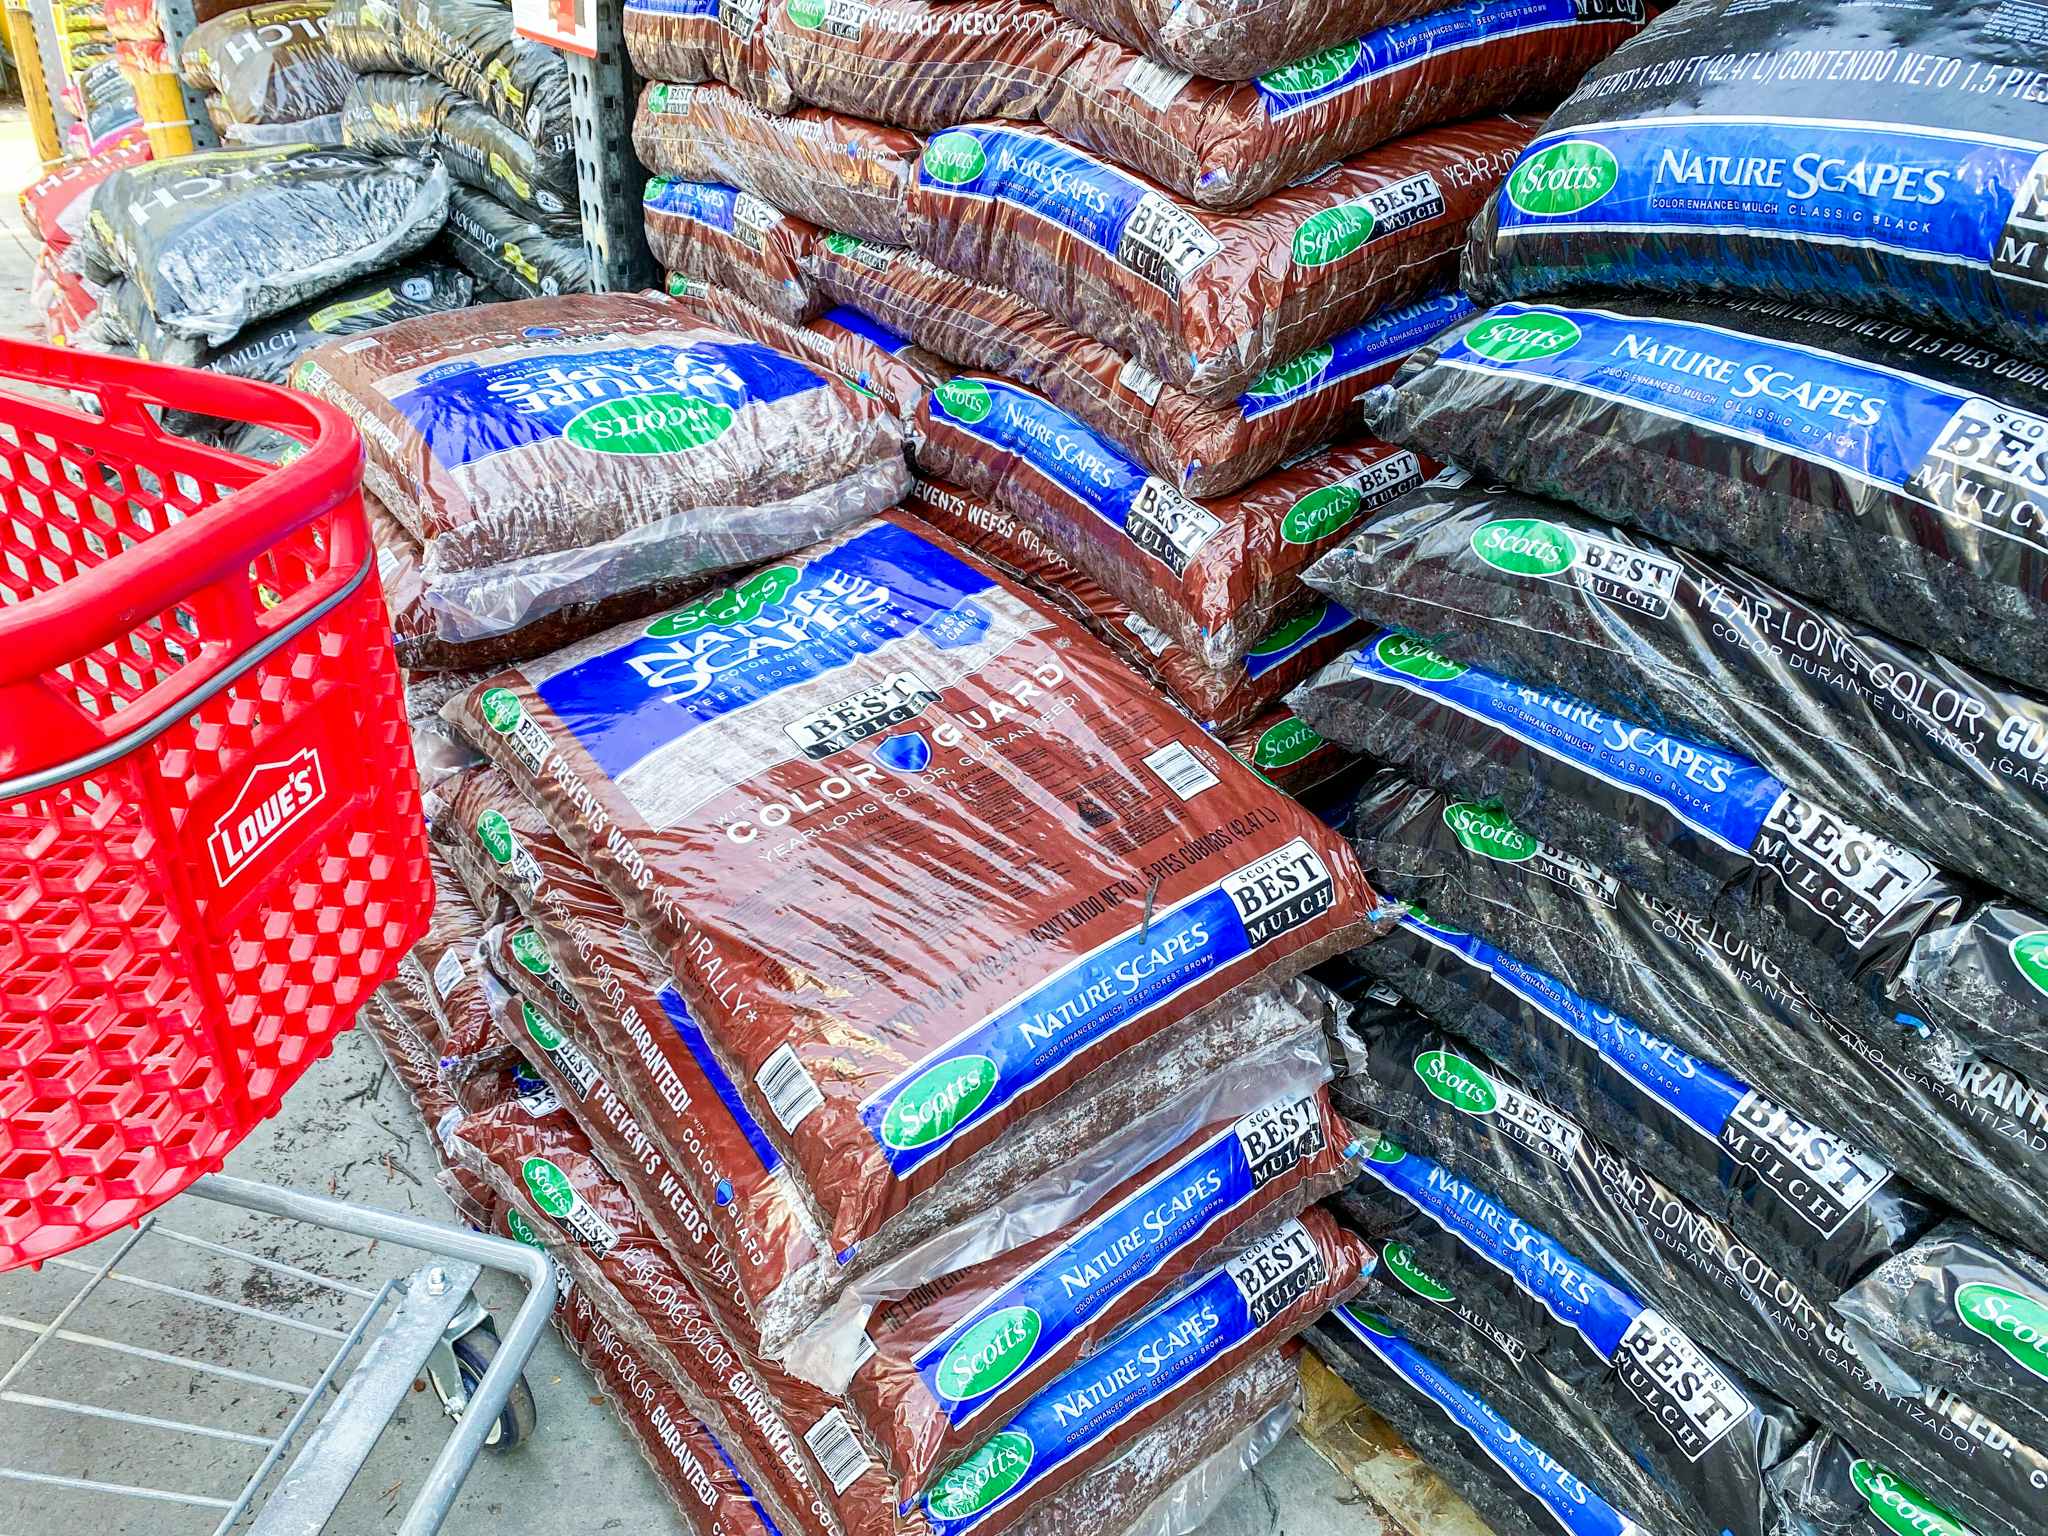 Scotts Nature Scapes Mulch at Lowe's